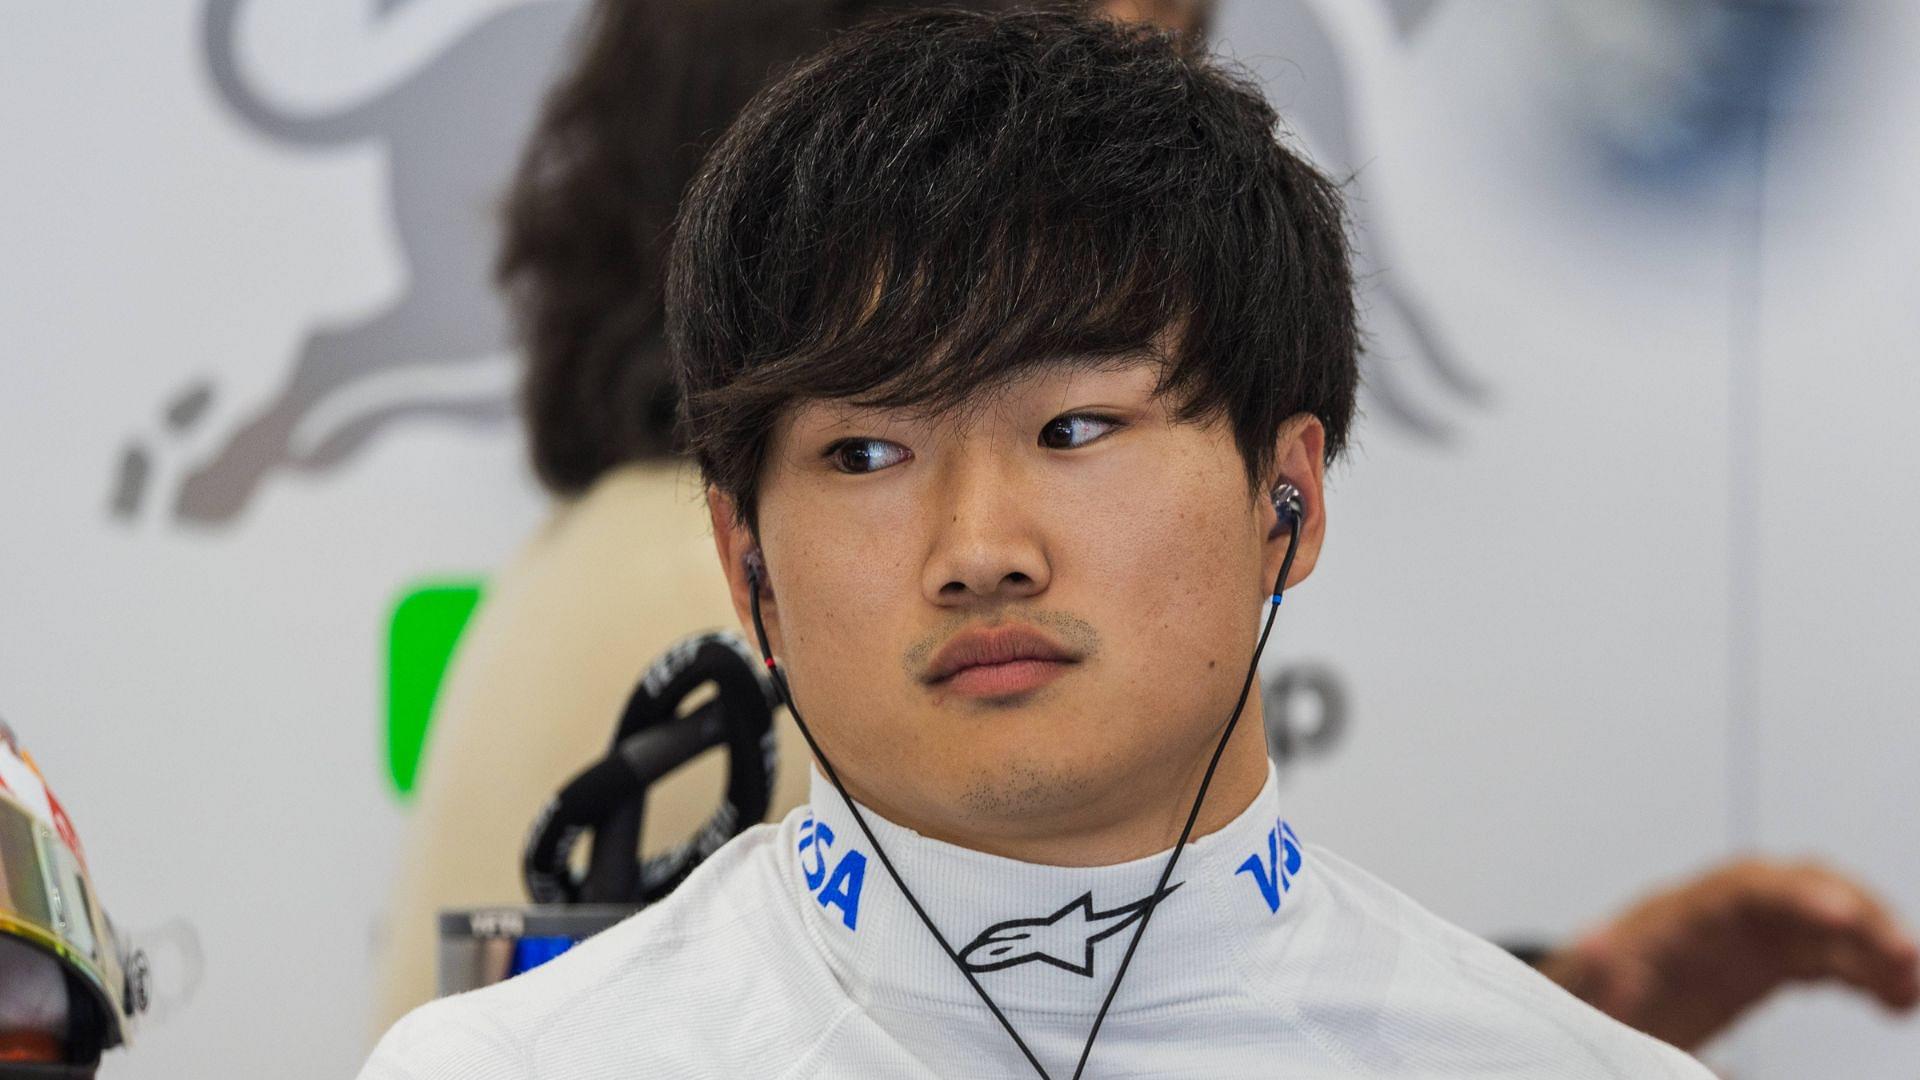 Why Yuki Tsunoda Has a 60-Place Grid Penalty Ahead of the Belgian GP?